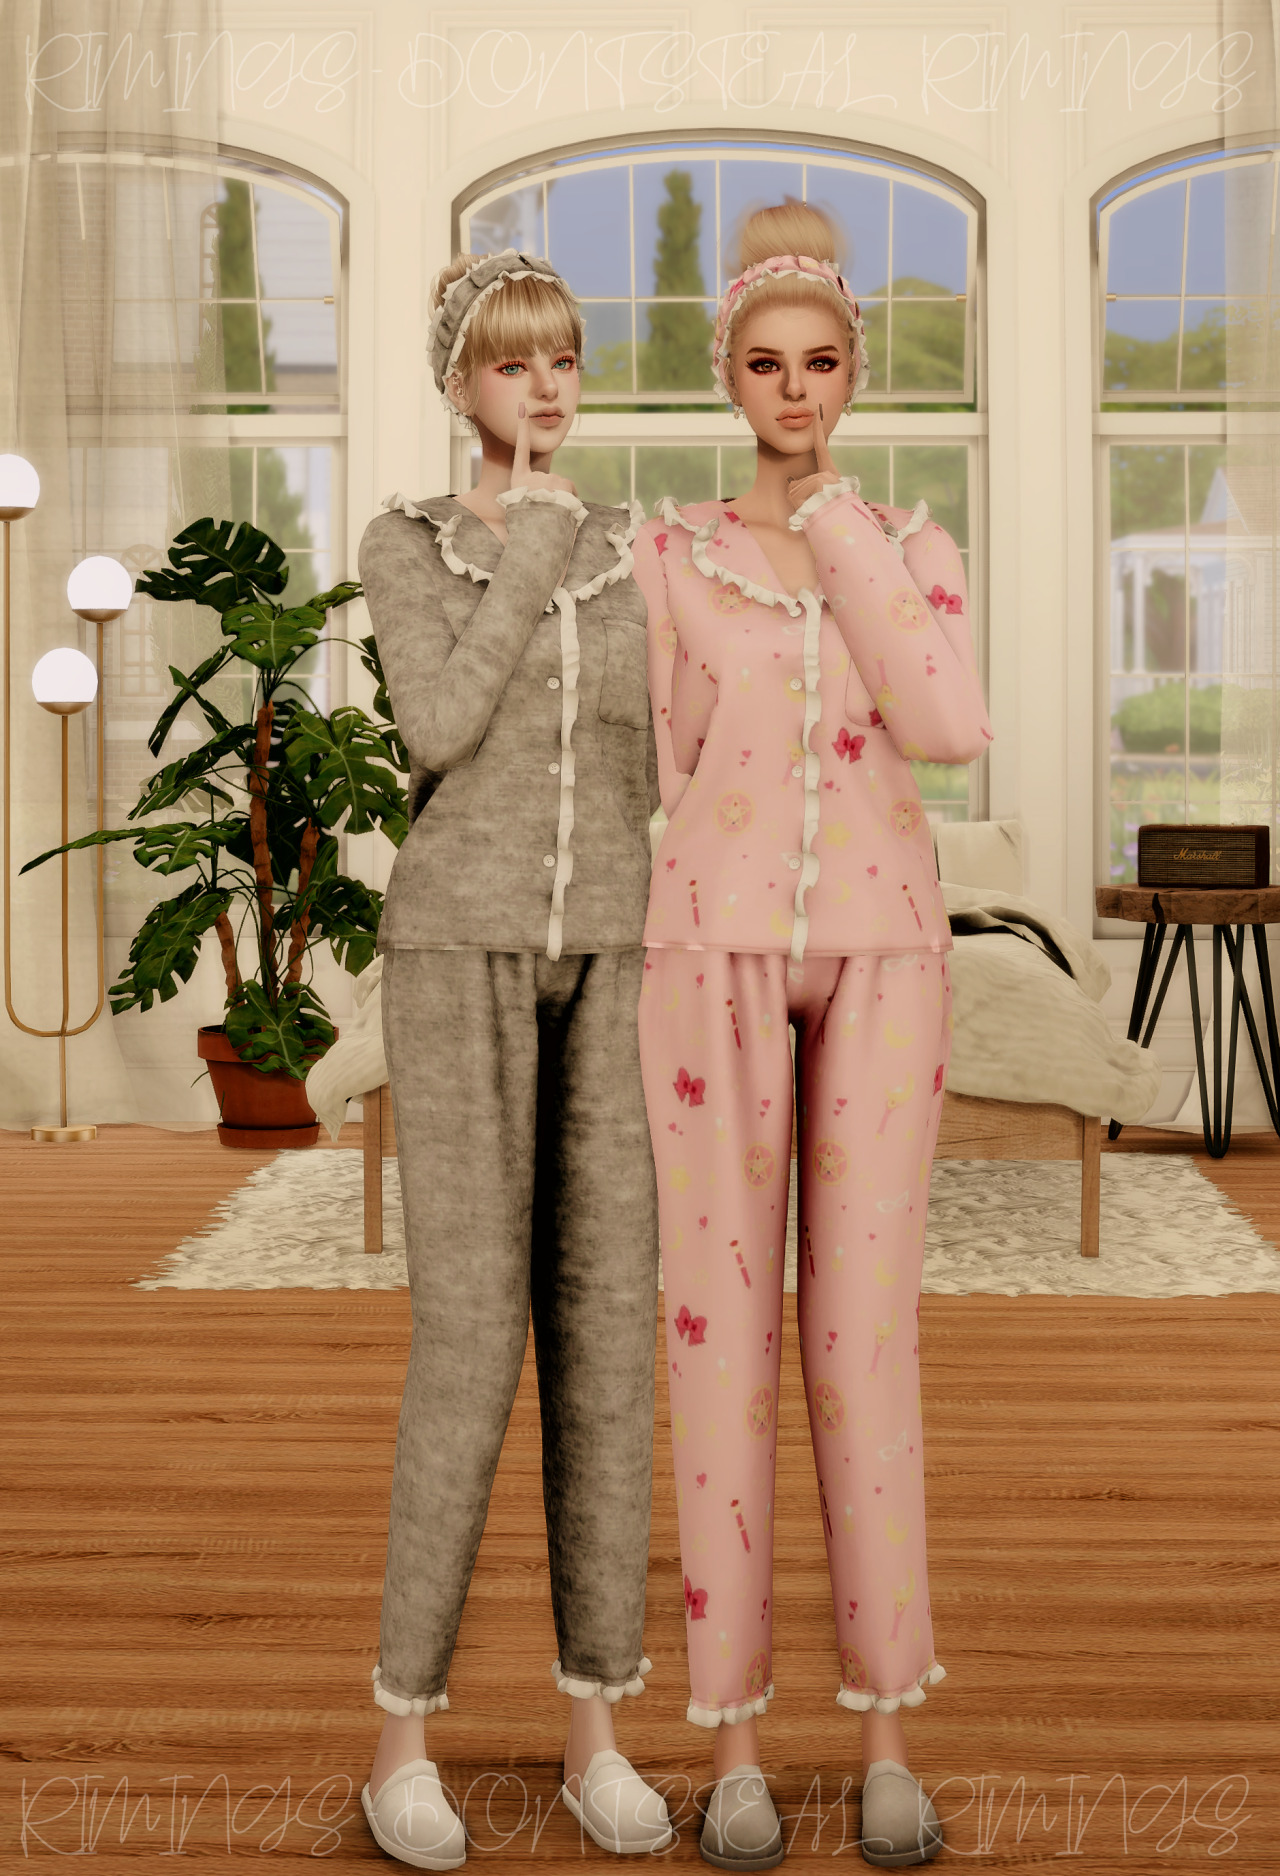 June Tboxe From Rimings • Sims 4 Downloads Frill Pajama Set At